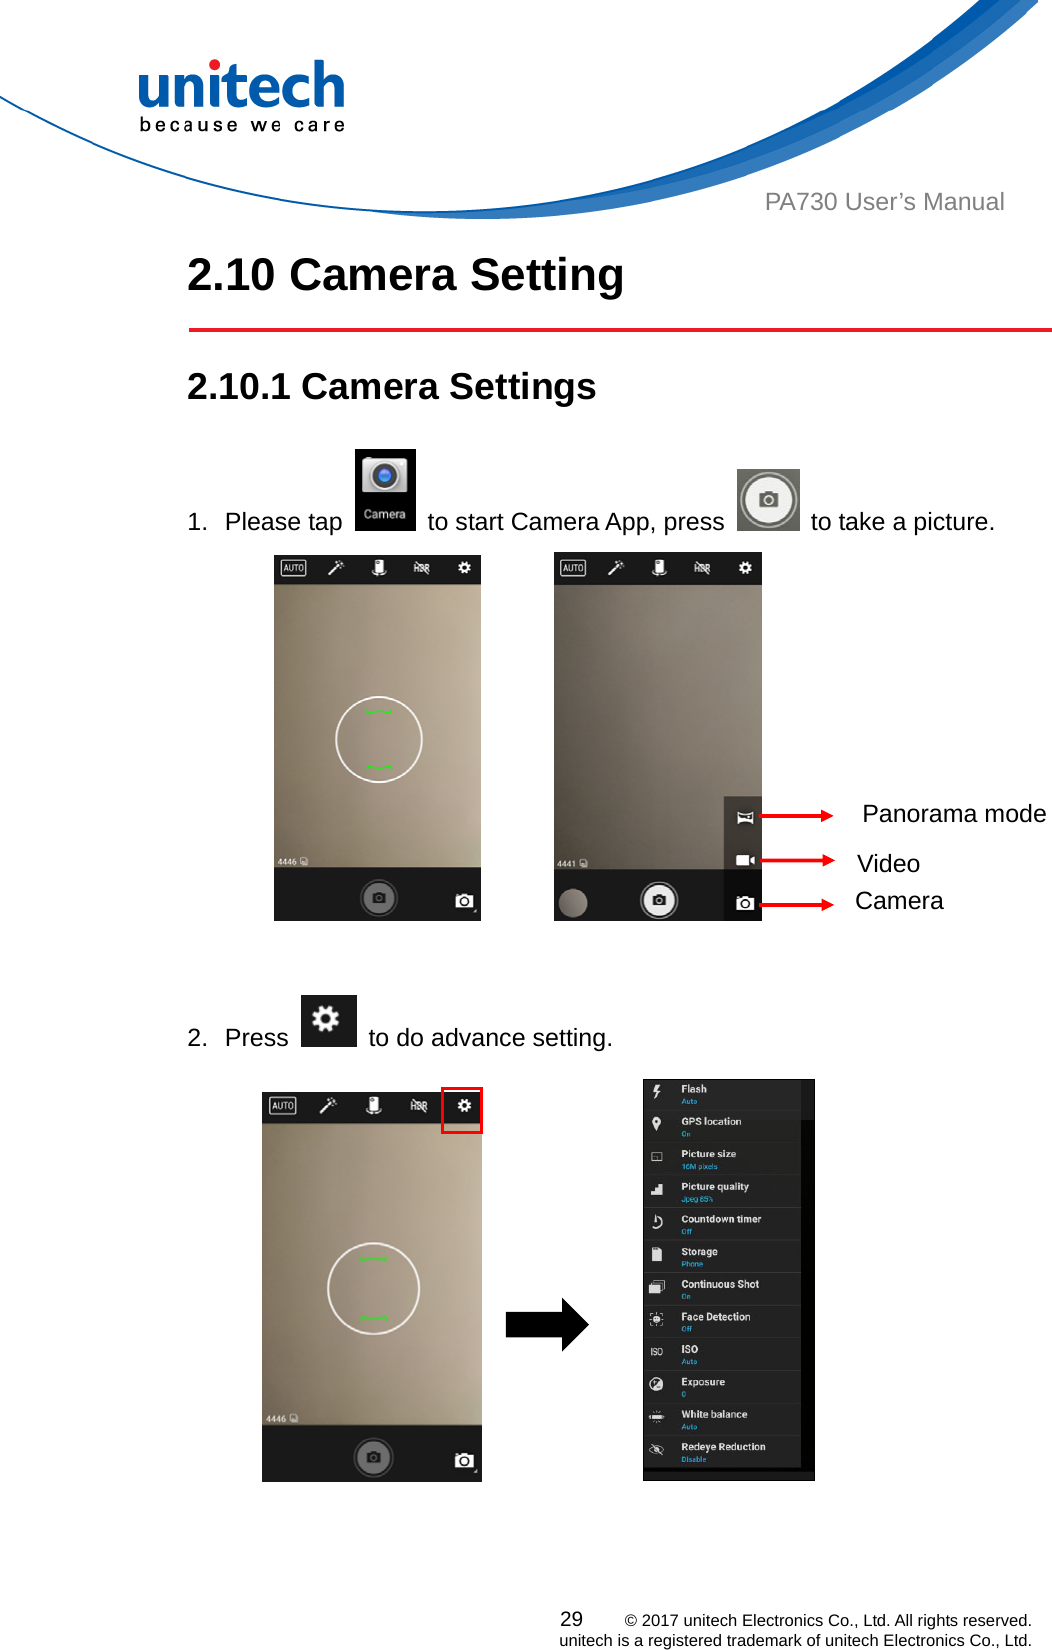  PA730 User’s Manual 2.10 Camera Setting  2.10.1 Camera Settings 29    © 2017 unitech Electronics Co., Ltd. All rights reserved.   unitech is a registered trademark of unitech Electronics Co., Ltd. 1. Please tap    to start Camera App, press    to take a picture.           2. Press    to do advance setting.                 Panorama mode Video Camera 